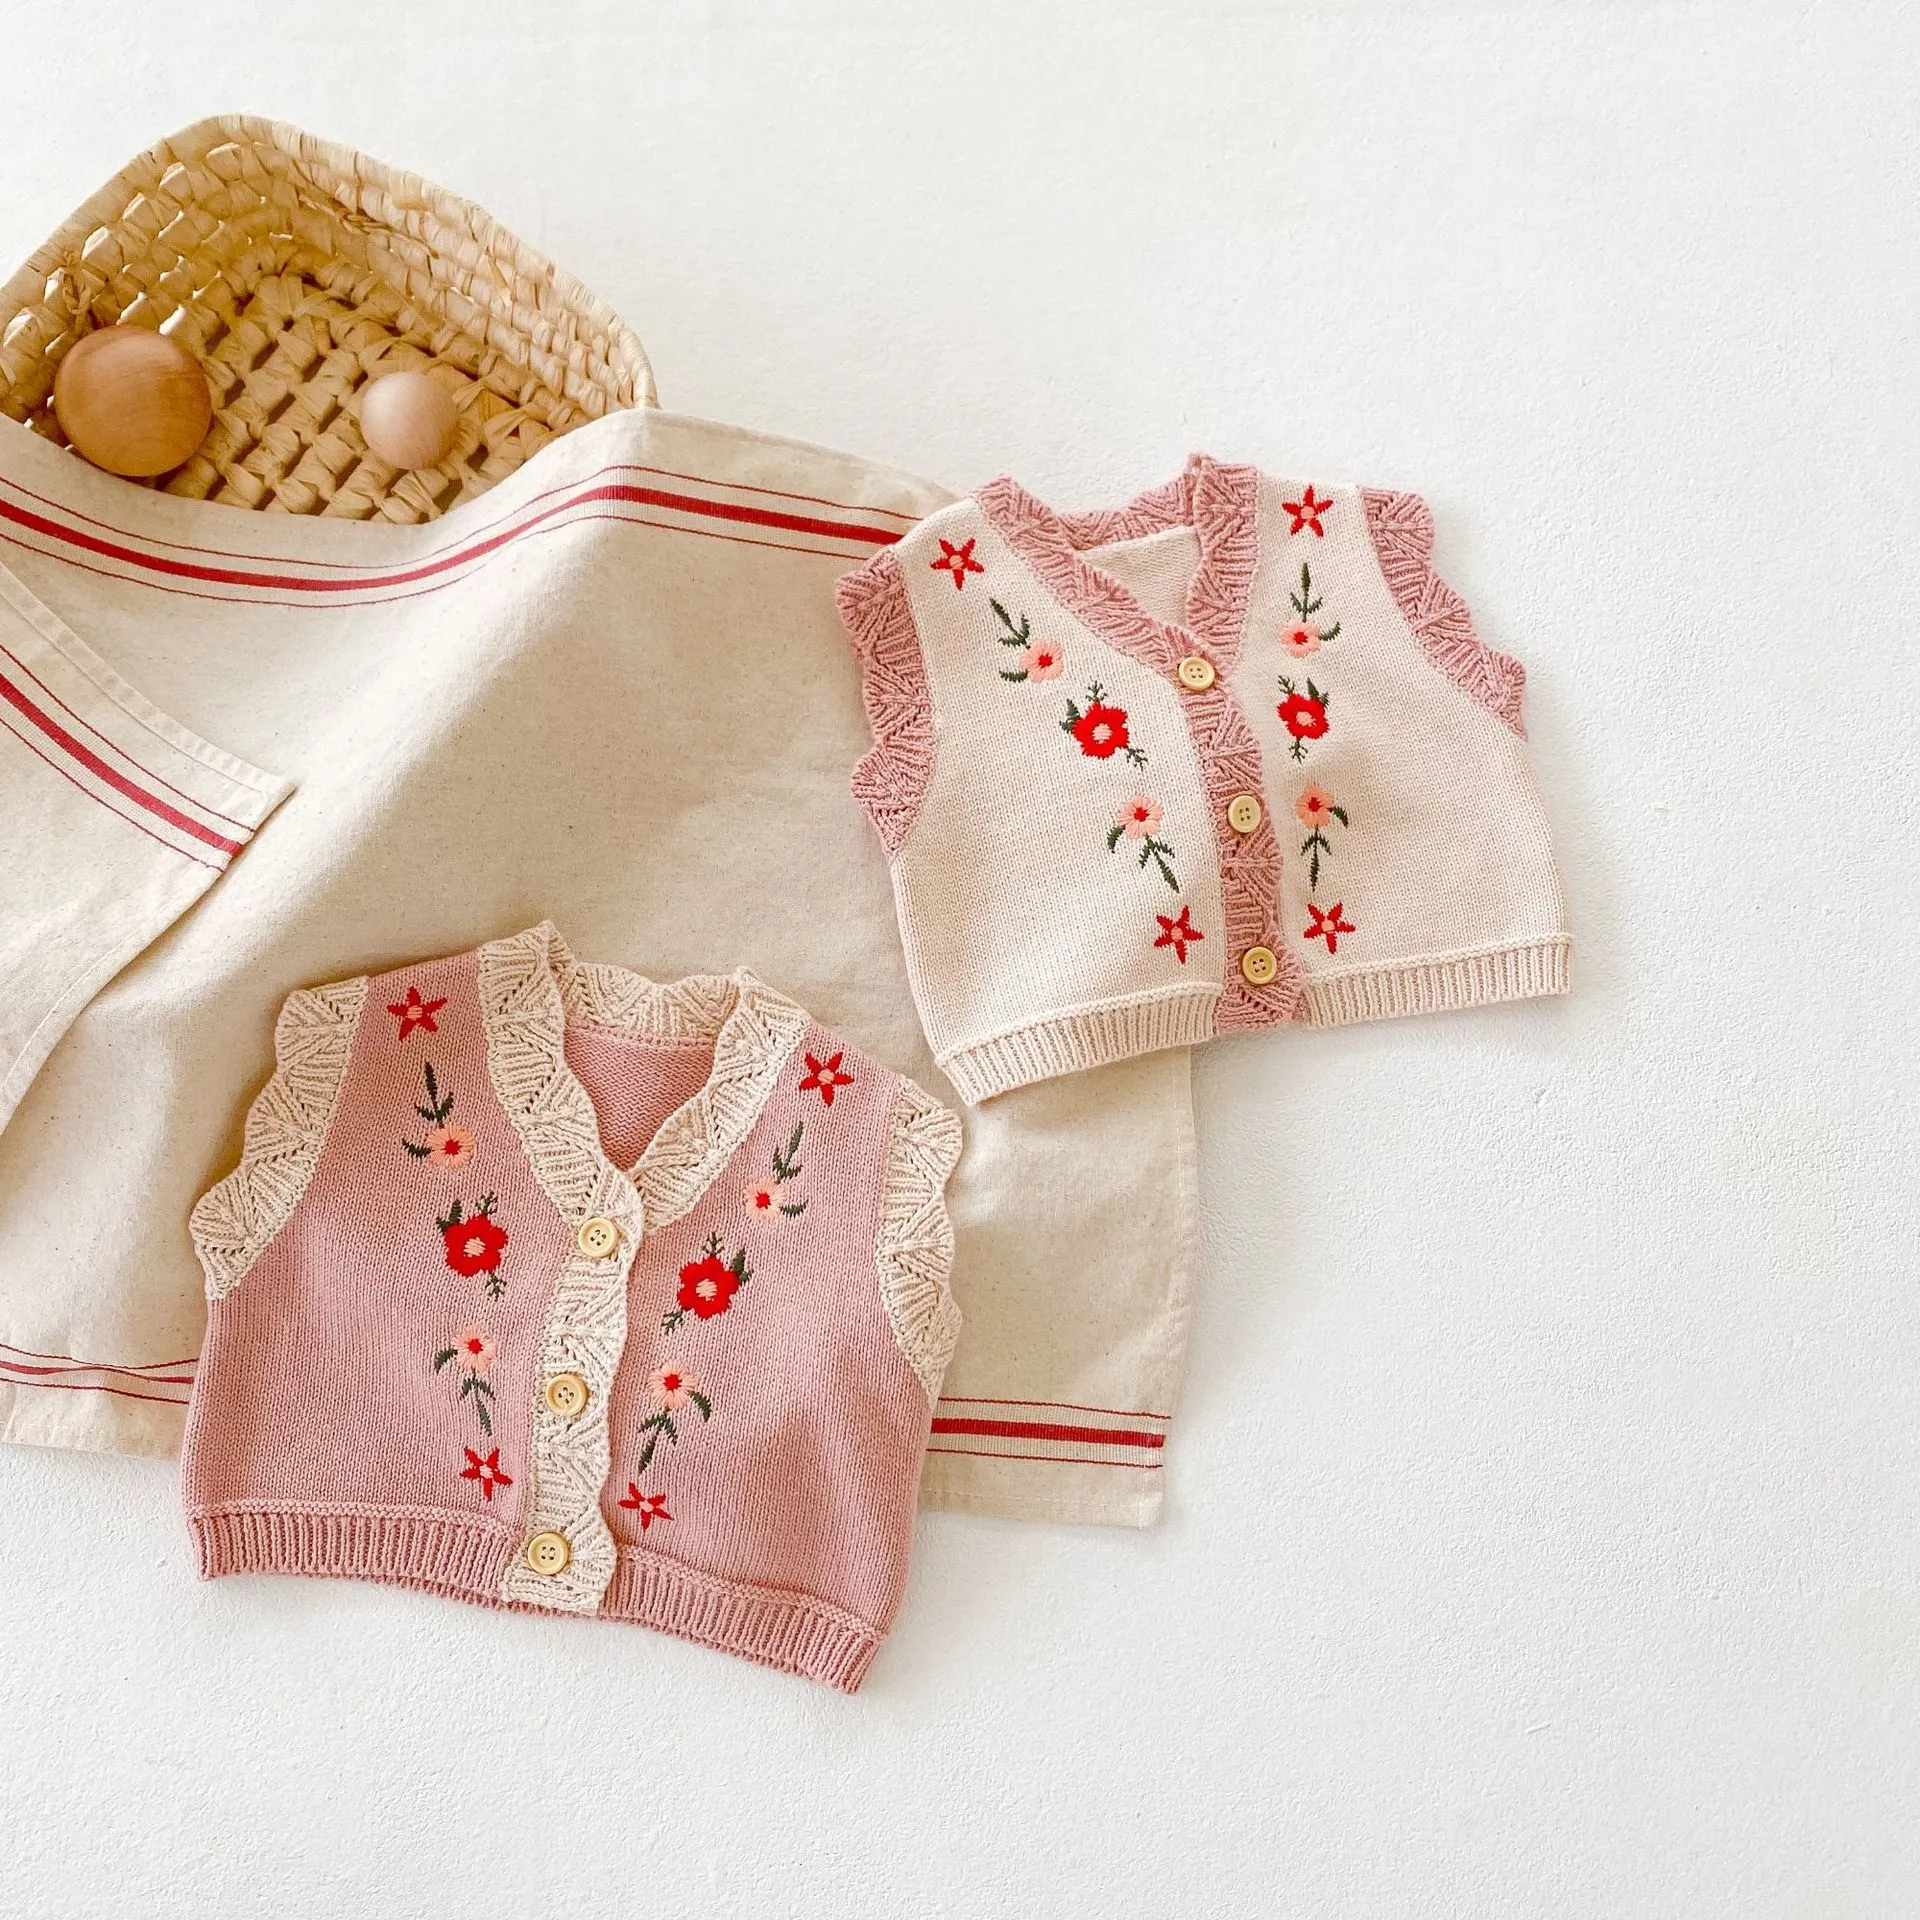 Baby Girls' Waistcoats Cotton Vest 0-2 Years Baby Waistcoat Sleeveless Clothes Wholesale Infant Toddler Kids Vest for Baby Girl